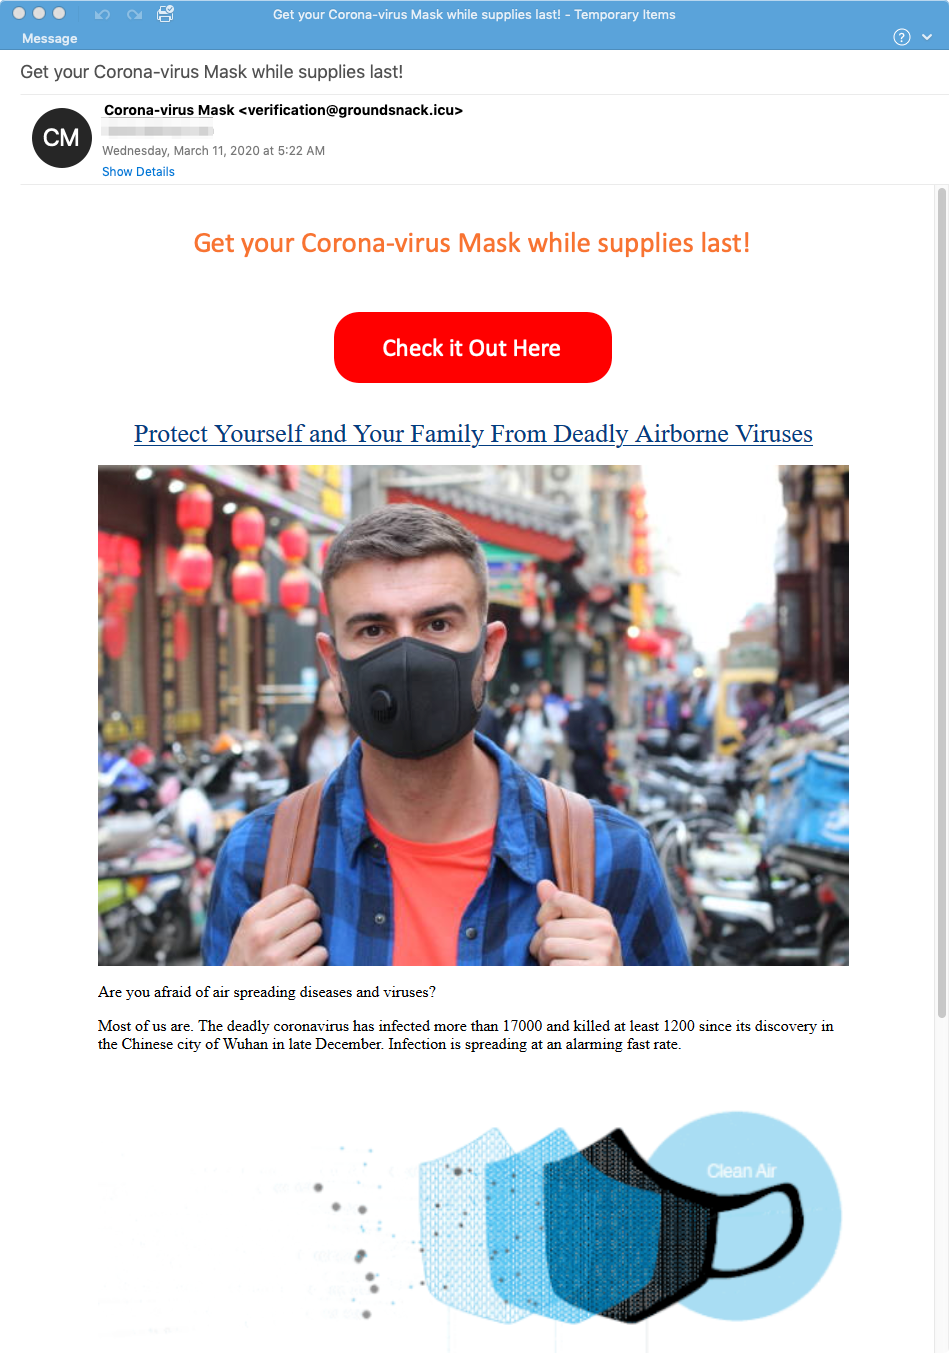 Corornavirus Mask For Sale Spam Email Example